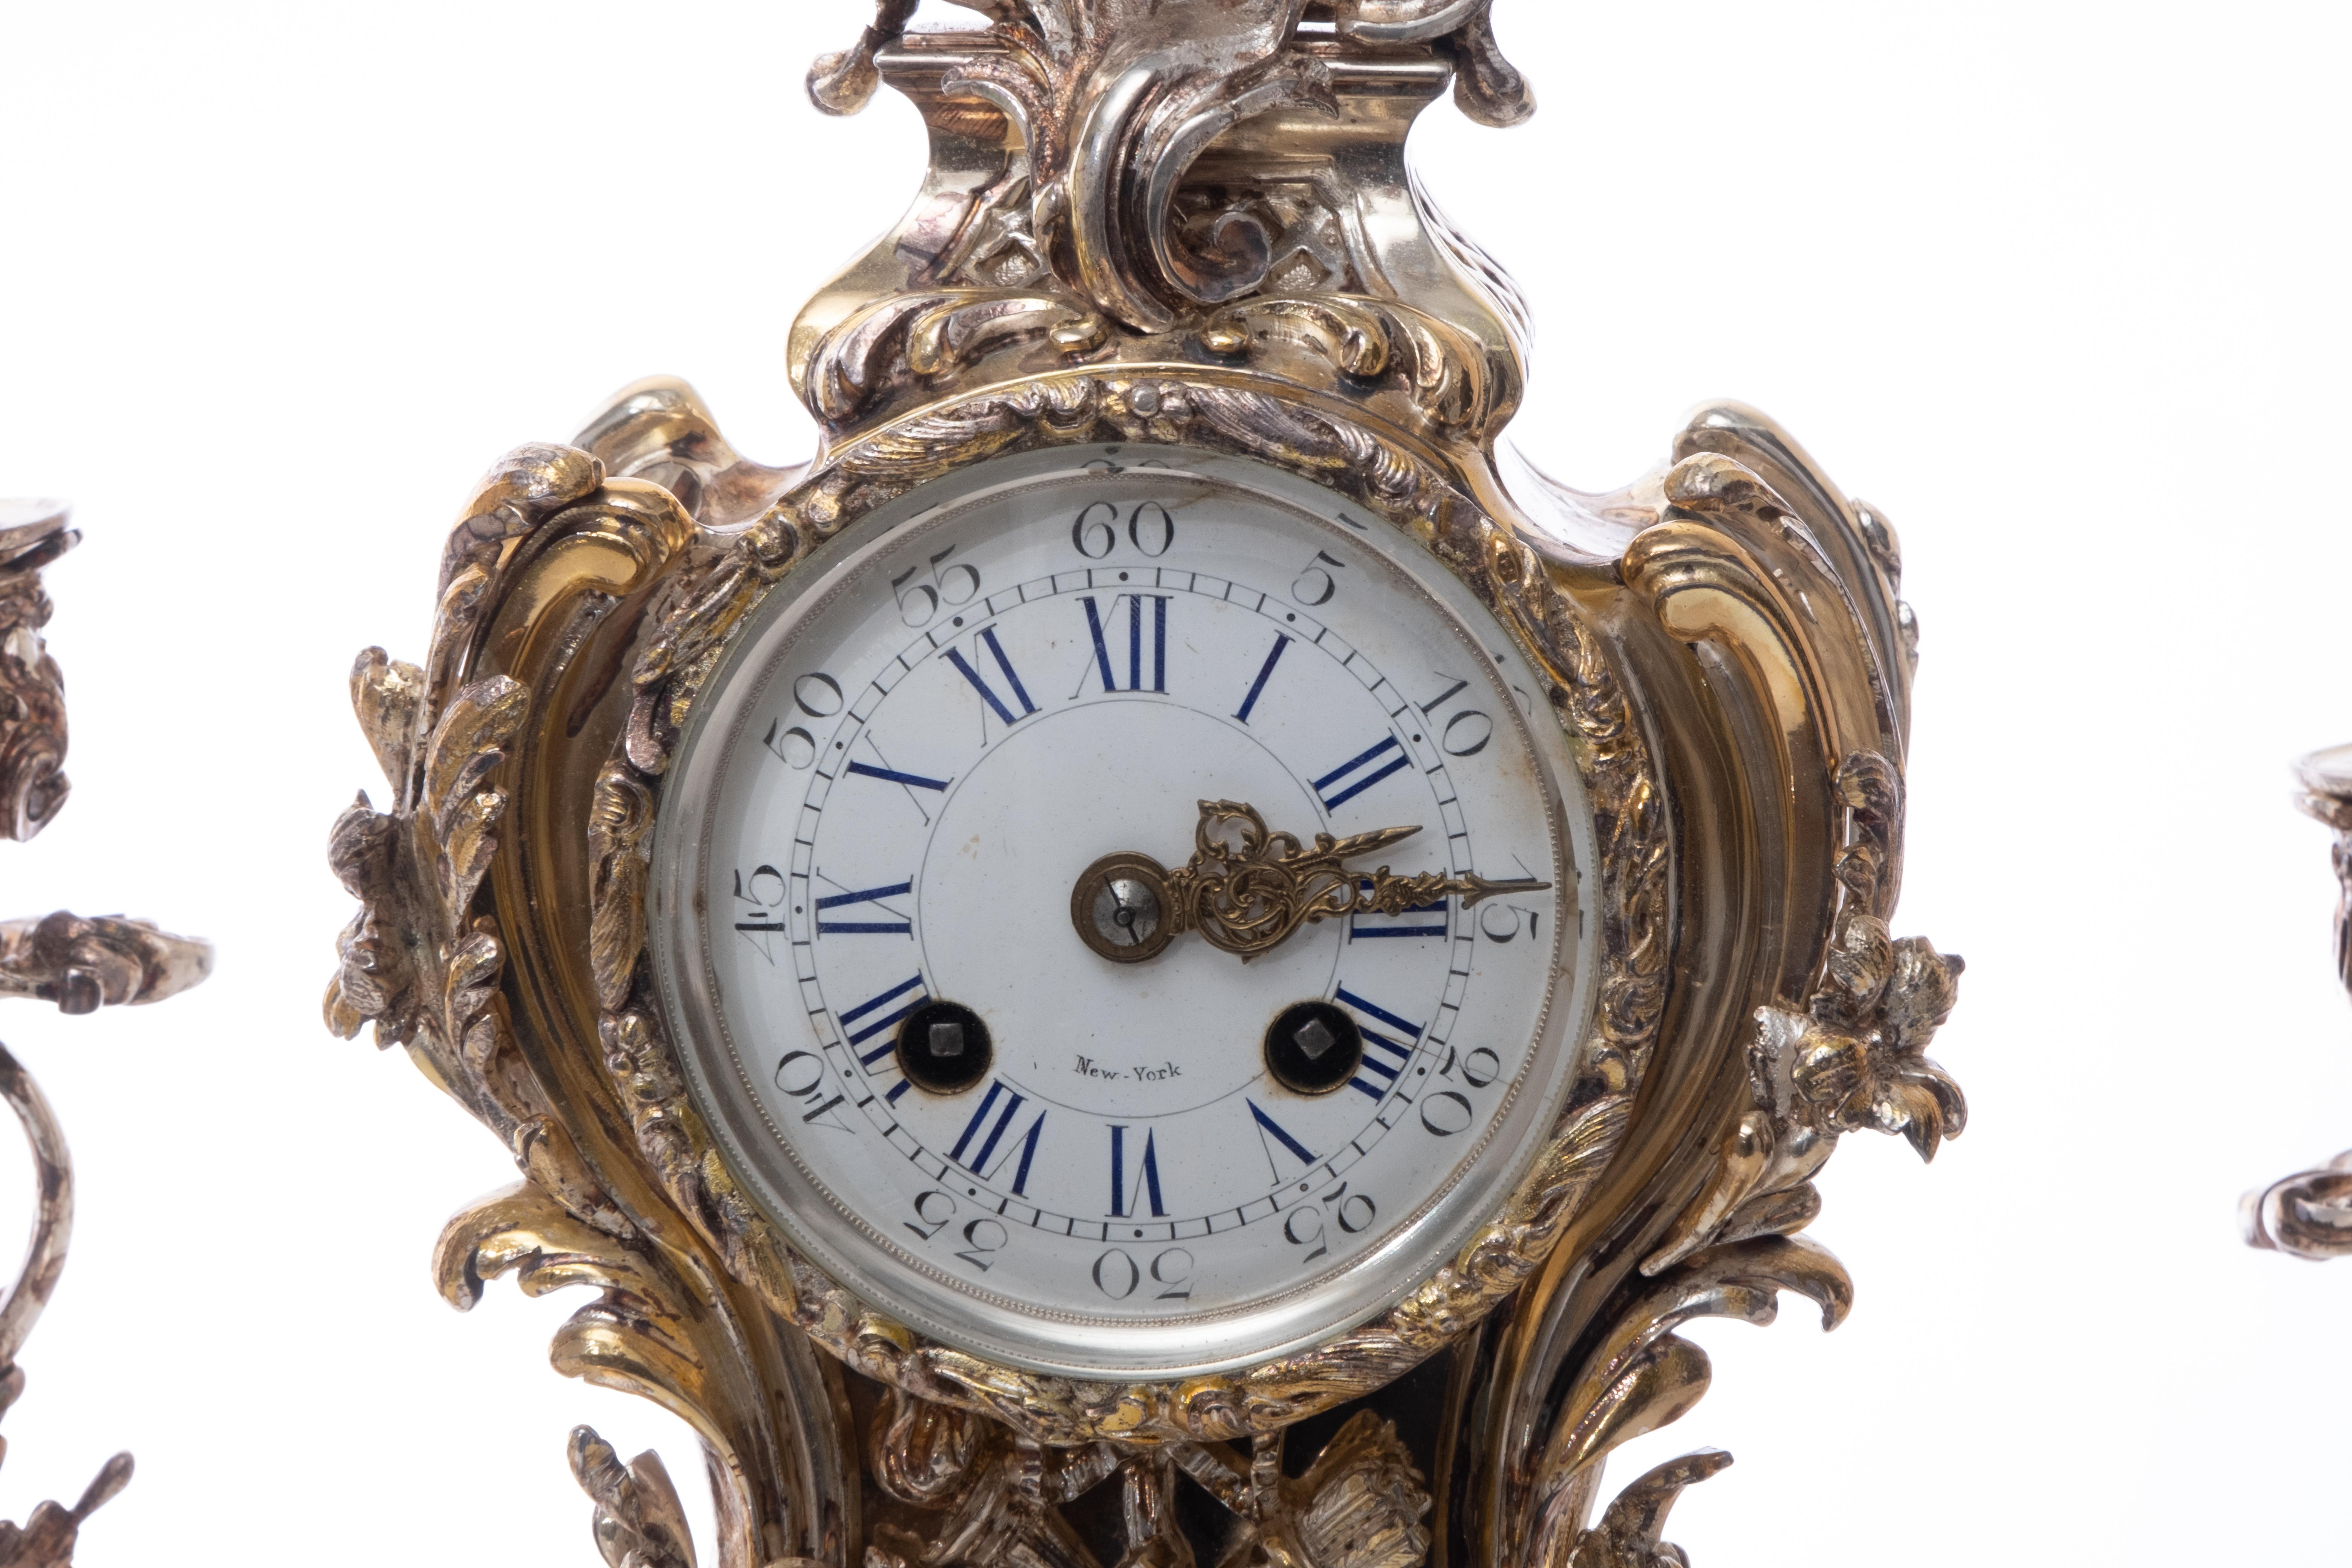 A French Louis XIV three (3) piece silver over bronze mantel clock and garnitures set. A clock in silver over bronze accompanied with a pair of candlestick garnitures. Produced in an elegant Baroque King Louis VI design. White enamel clock face with